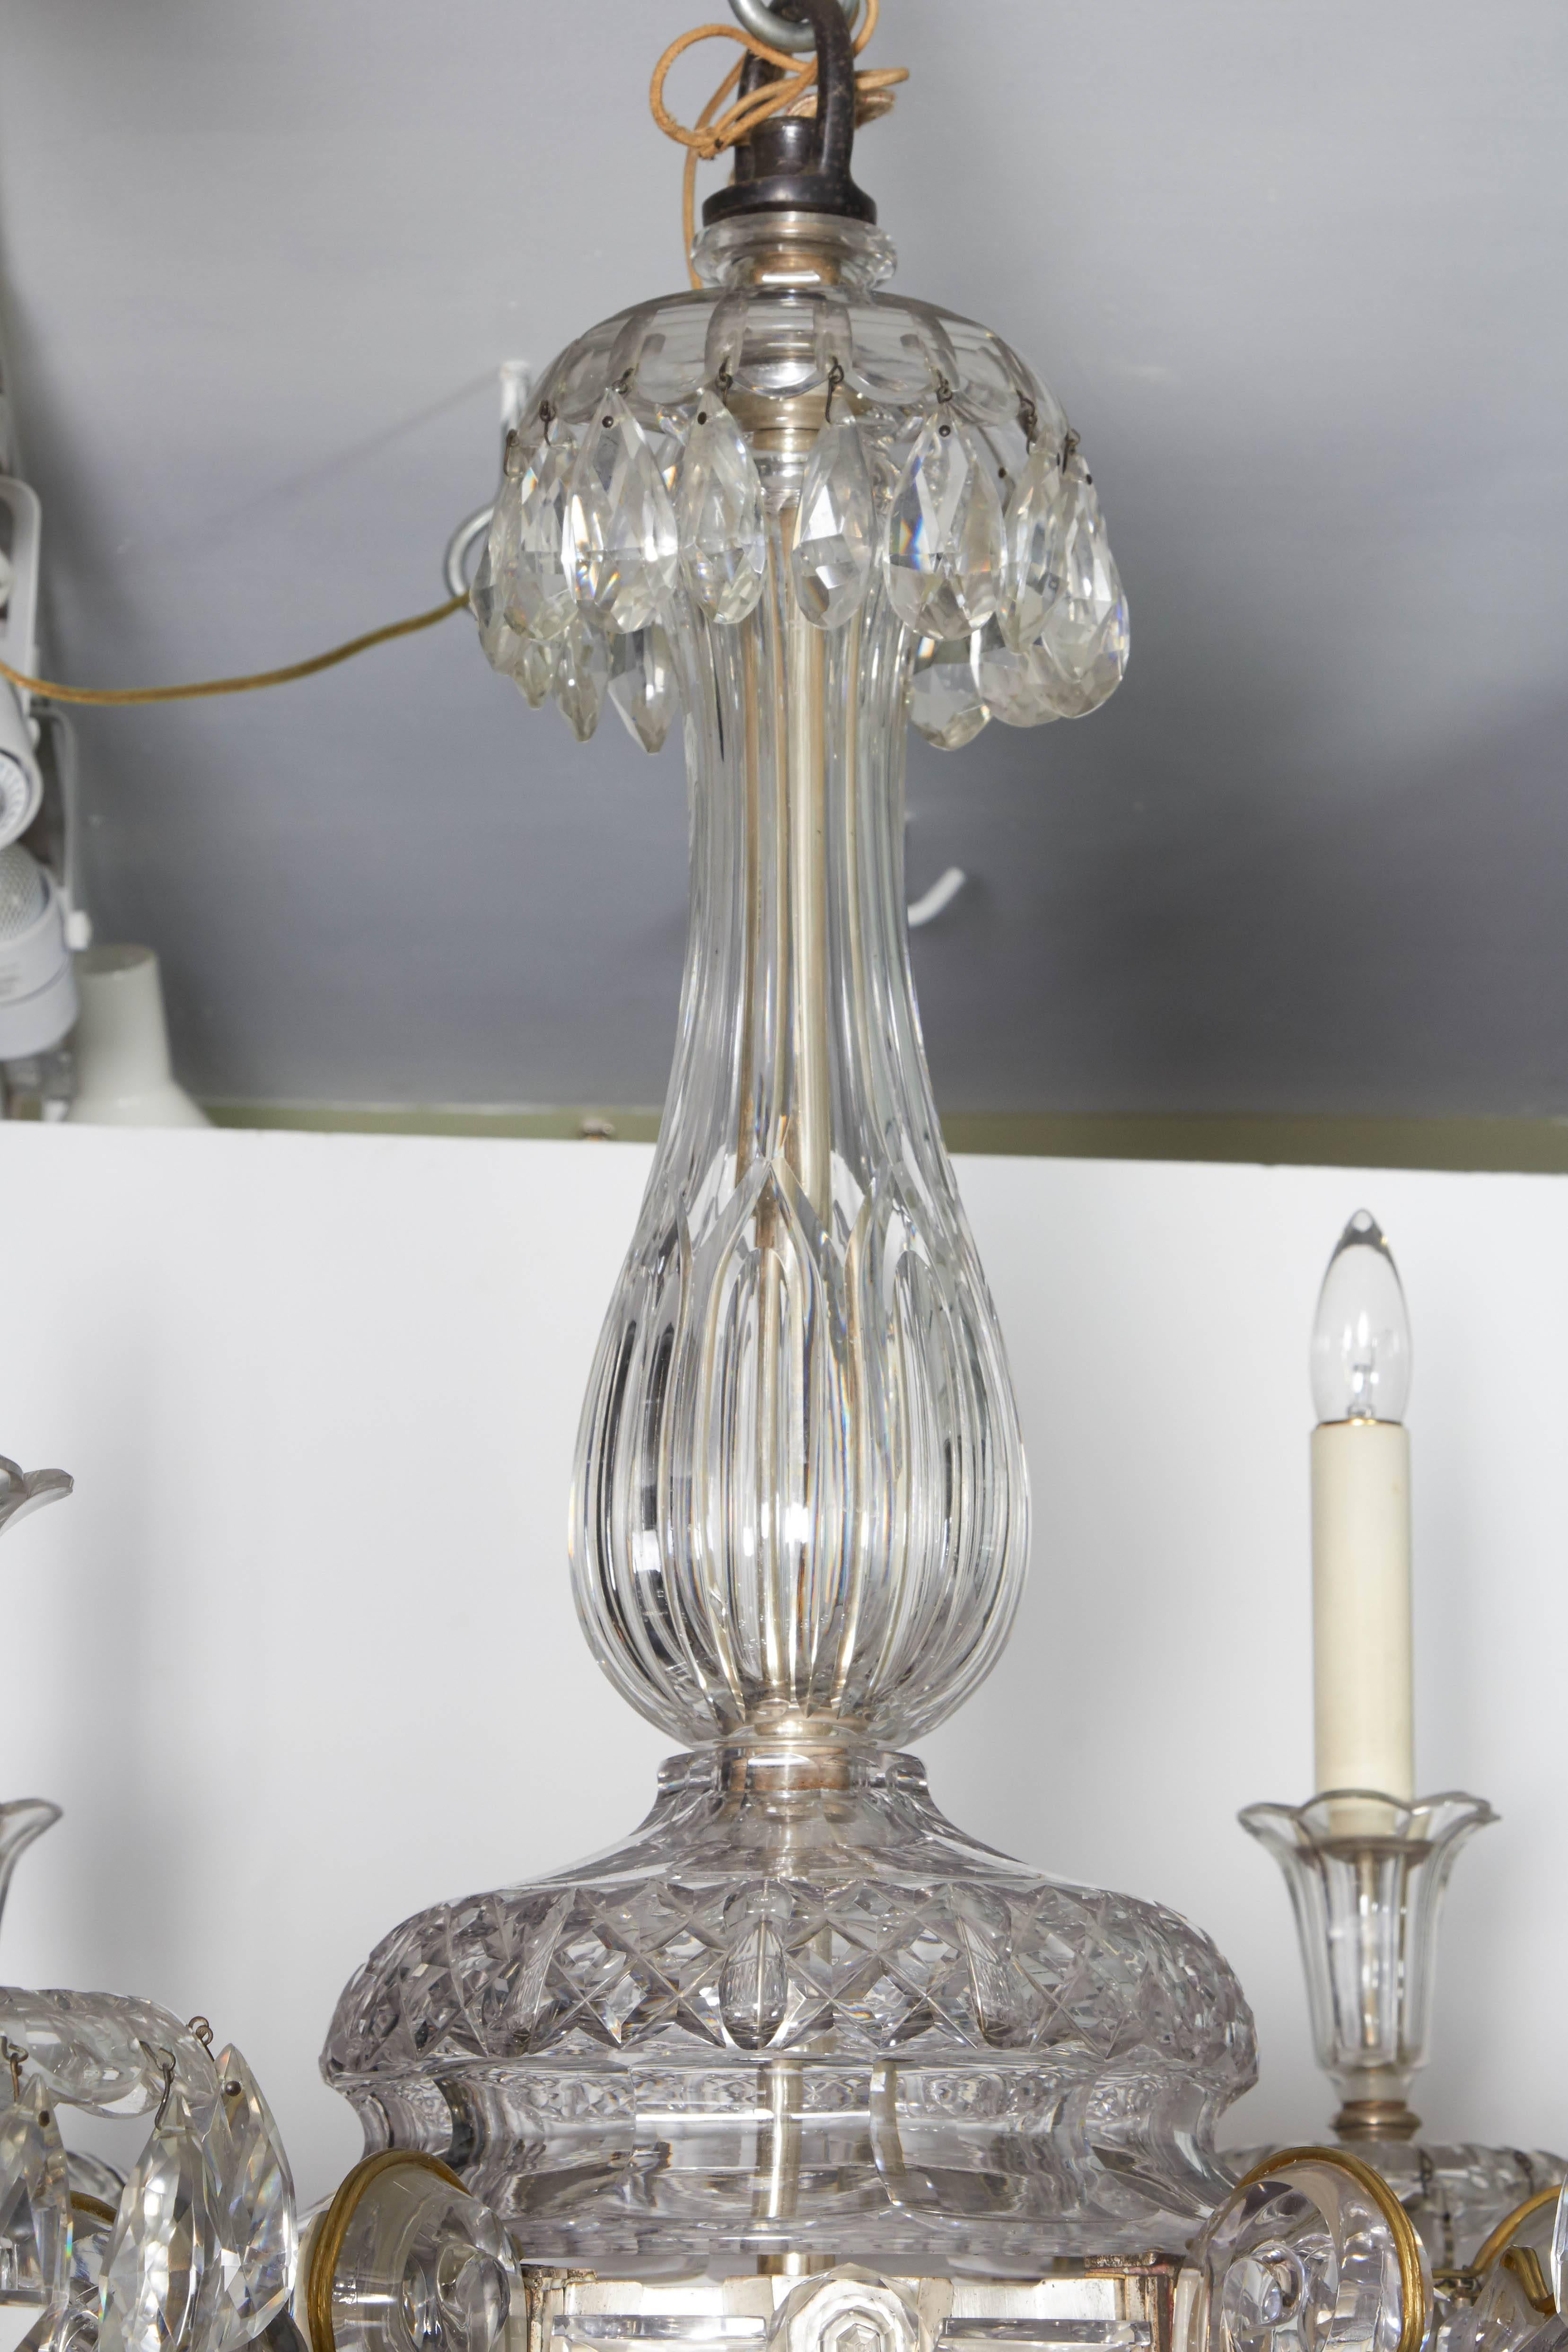 An exceptional French Art Deco molded and cut crystal chandelier, the central stem issuing six out-scrolled candle-branches suspending lustre drops, terminating in a spherical boss, attributed to Compagnie Des Cristalleries De Baccarat, Paris, circa